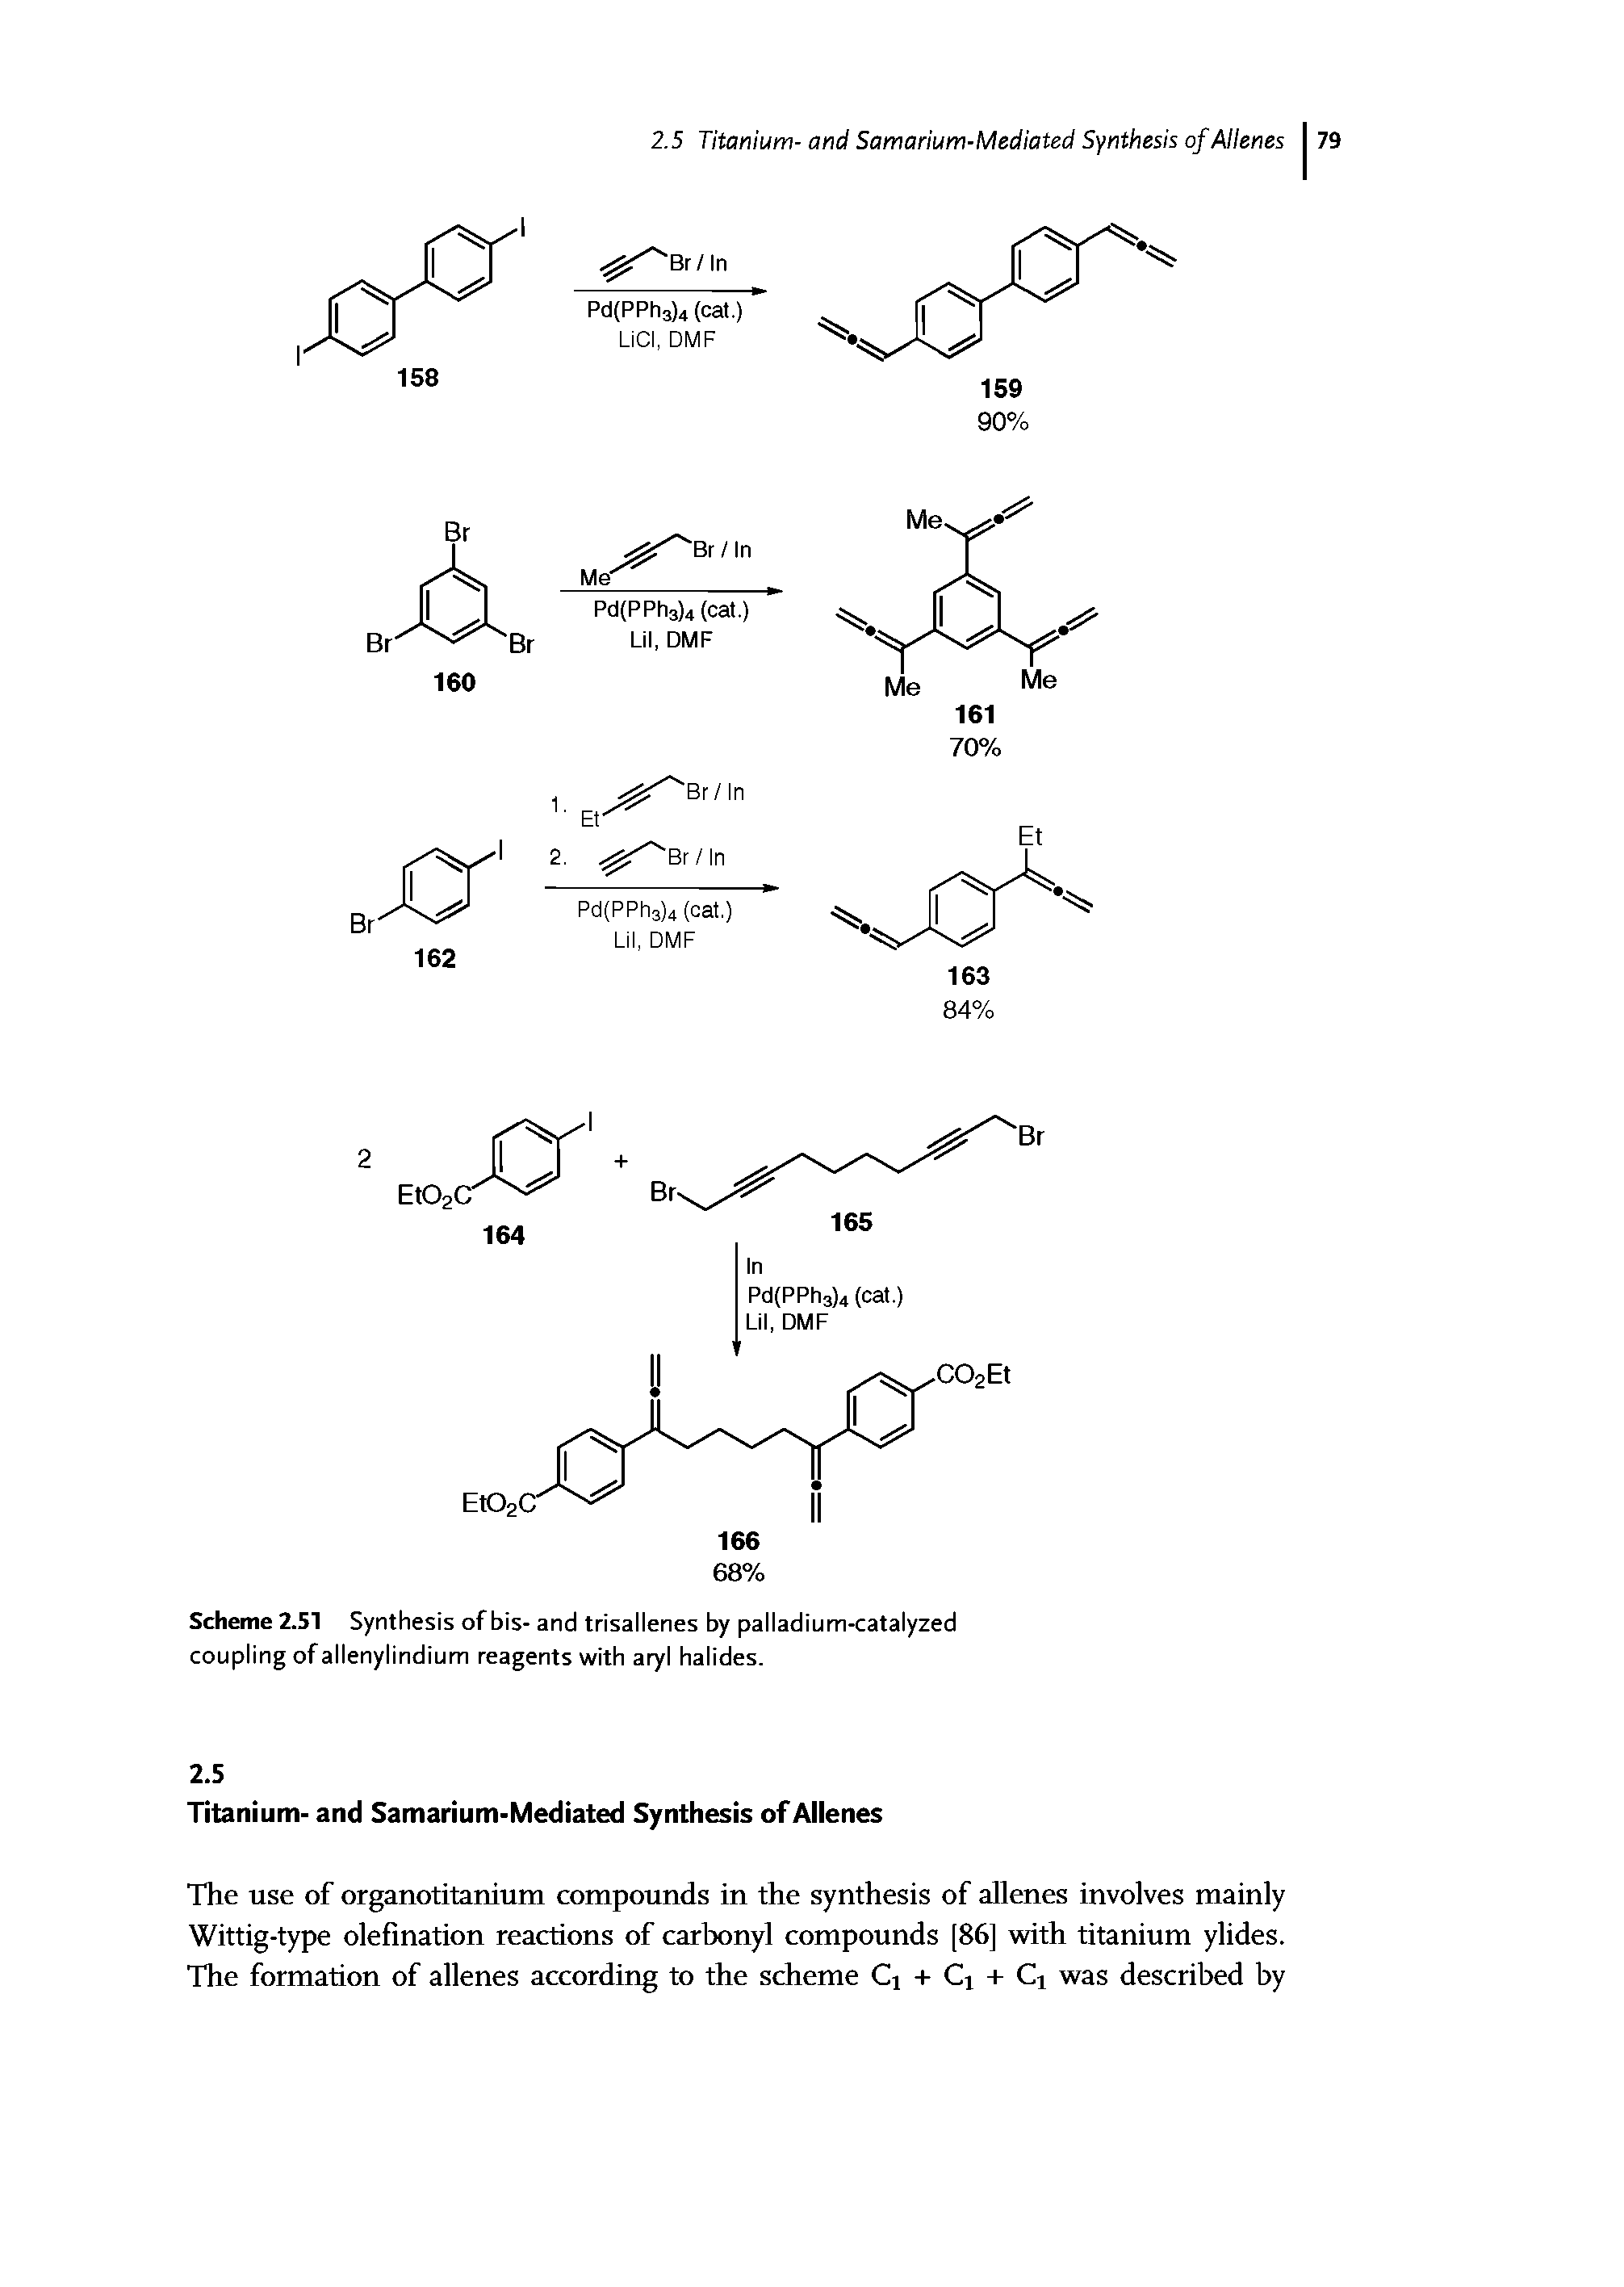 Scheme 2.51 Synthesis of bis- and trisallenes by palladium-catalyzed coupling of allenylindium reagents with aryl halides.